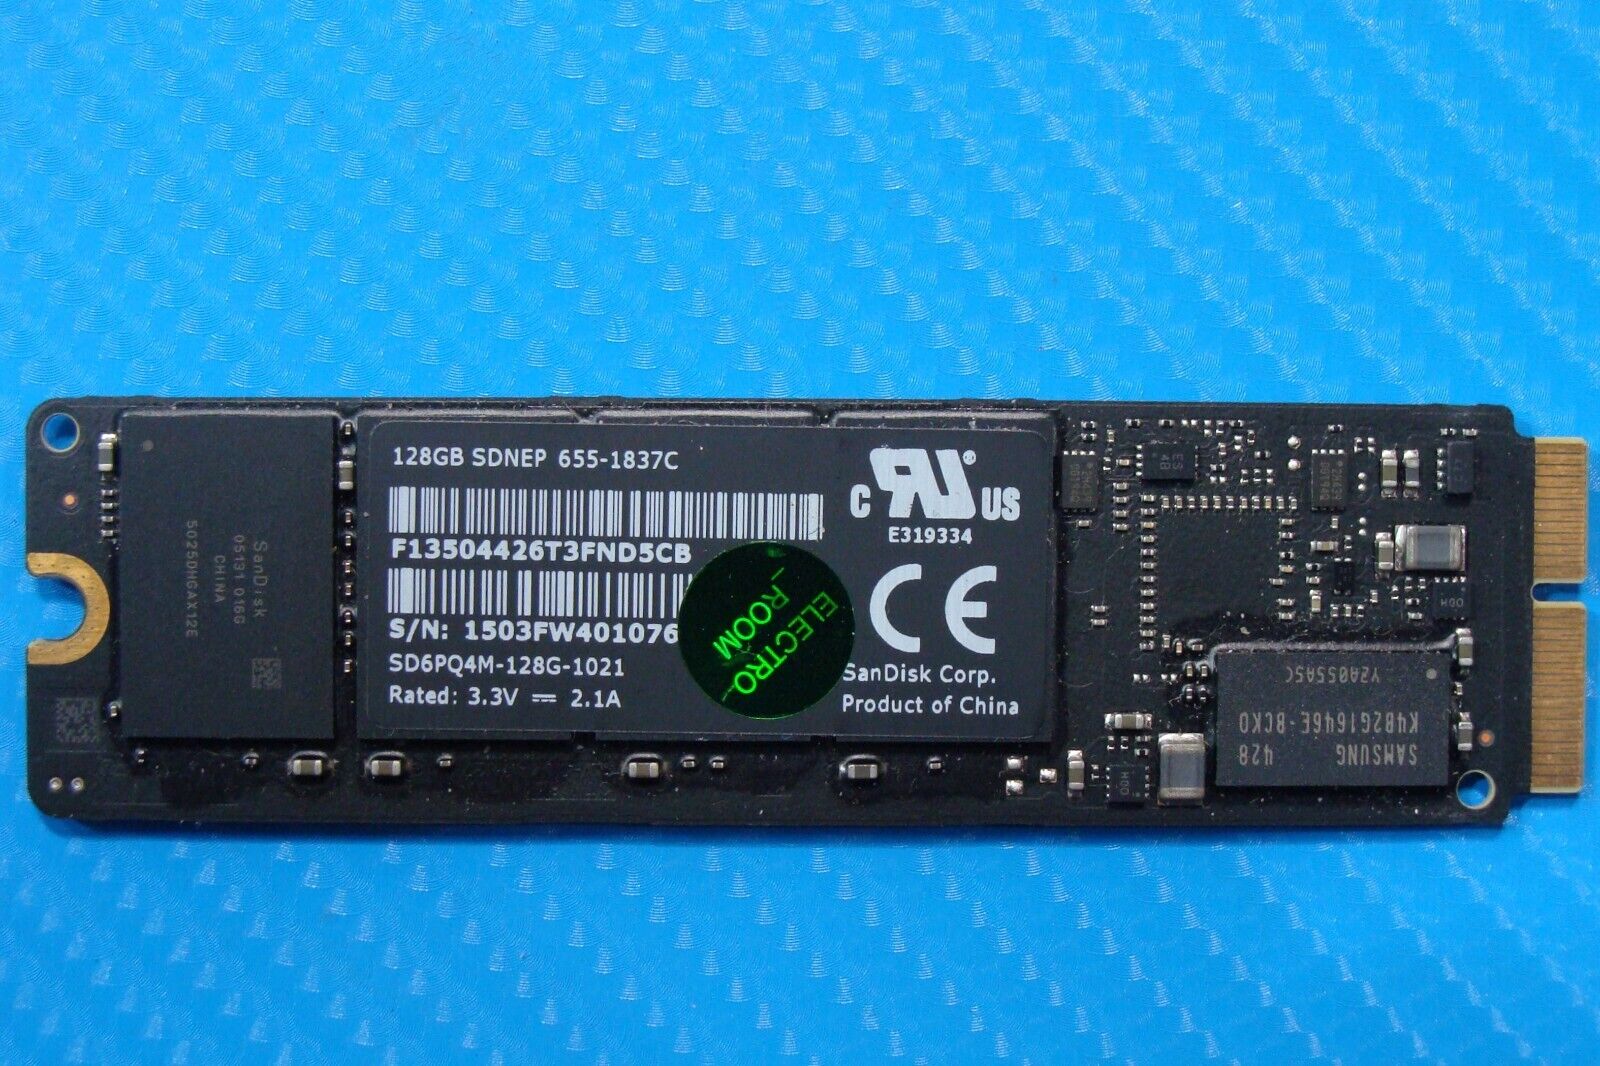 MacBook Air A1465 SanDisk 128GB Solid State Drive SD6PQ4M-128G-1021 655-1837C